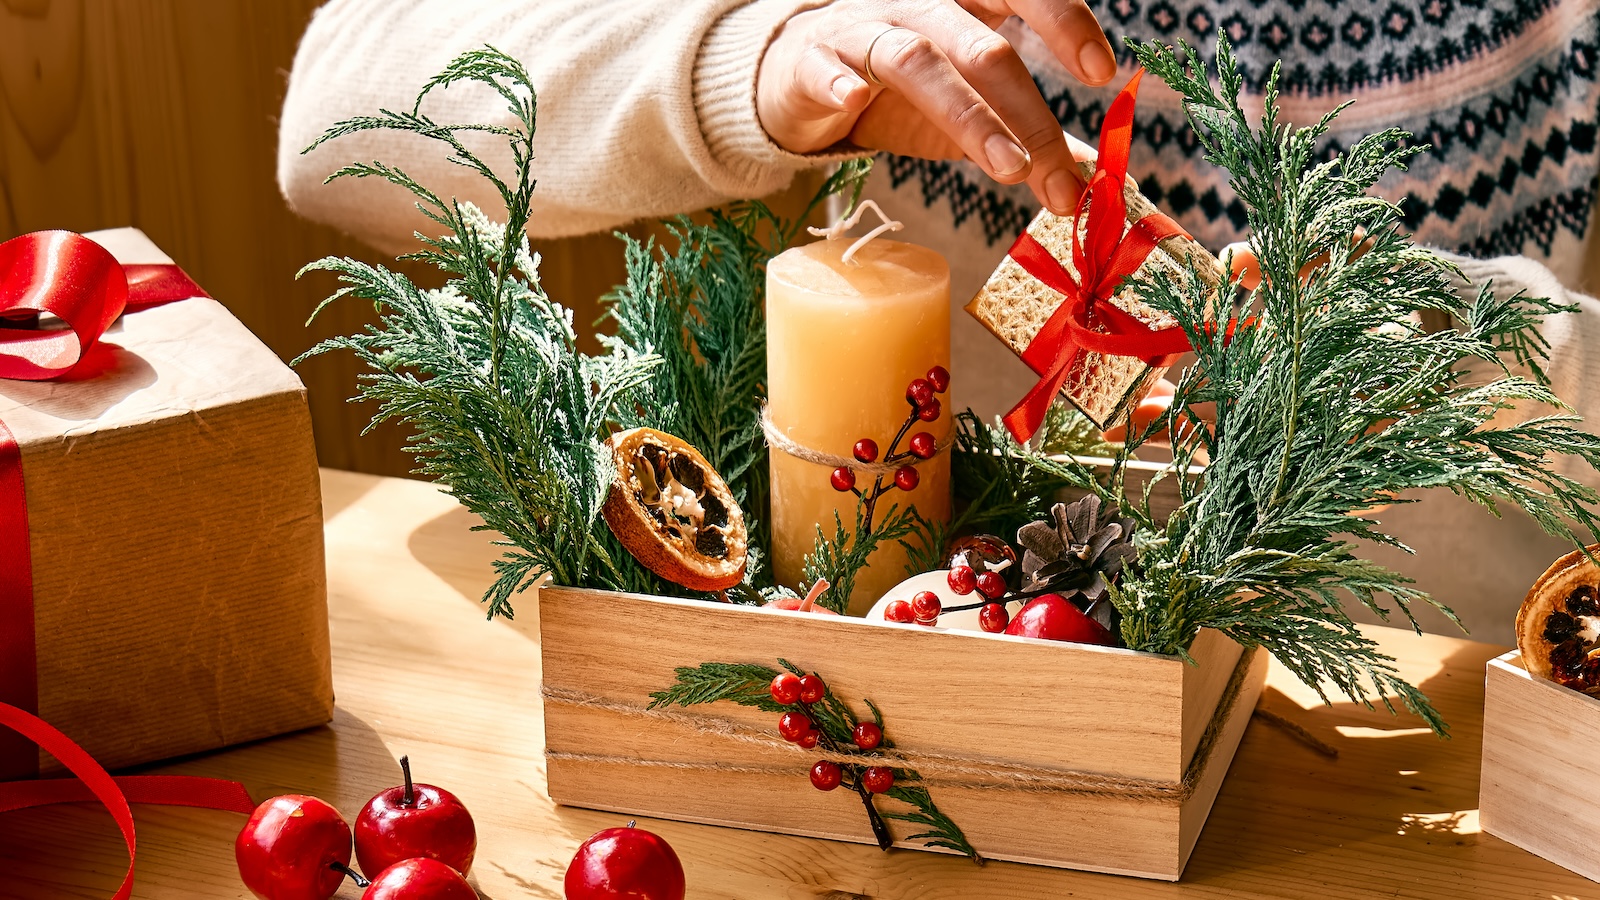 Foley shares three practices to recapture the essence of Christmas and bring more joy to the season for your family.